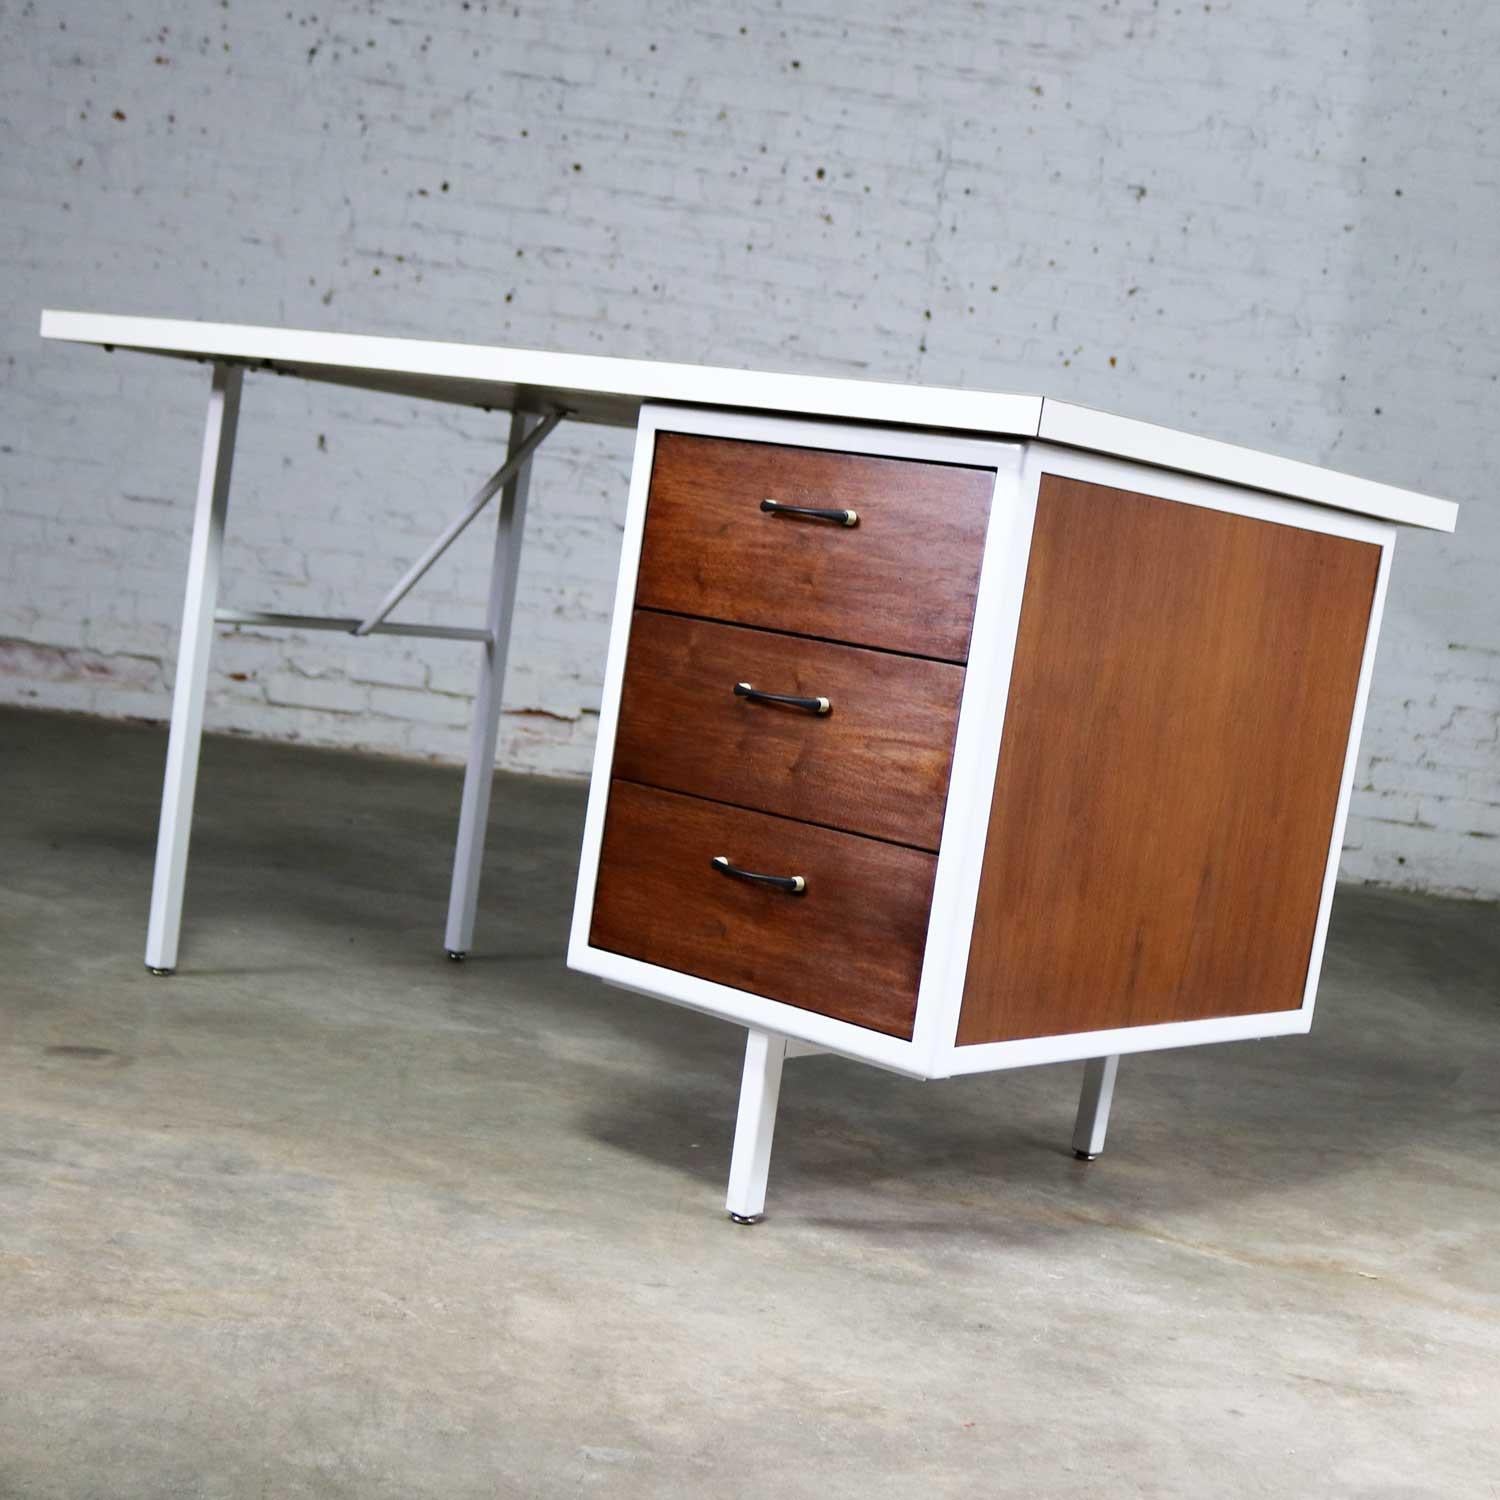 Handsome Mid-Century Modern smaller writing desk by the Robert John Co. of Philadelphia, Pennsylvania featuring walnut cabinet with white painted steel frame and white laminate top. This is from their Steelwood collection. It desk is in wonderful